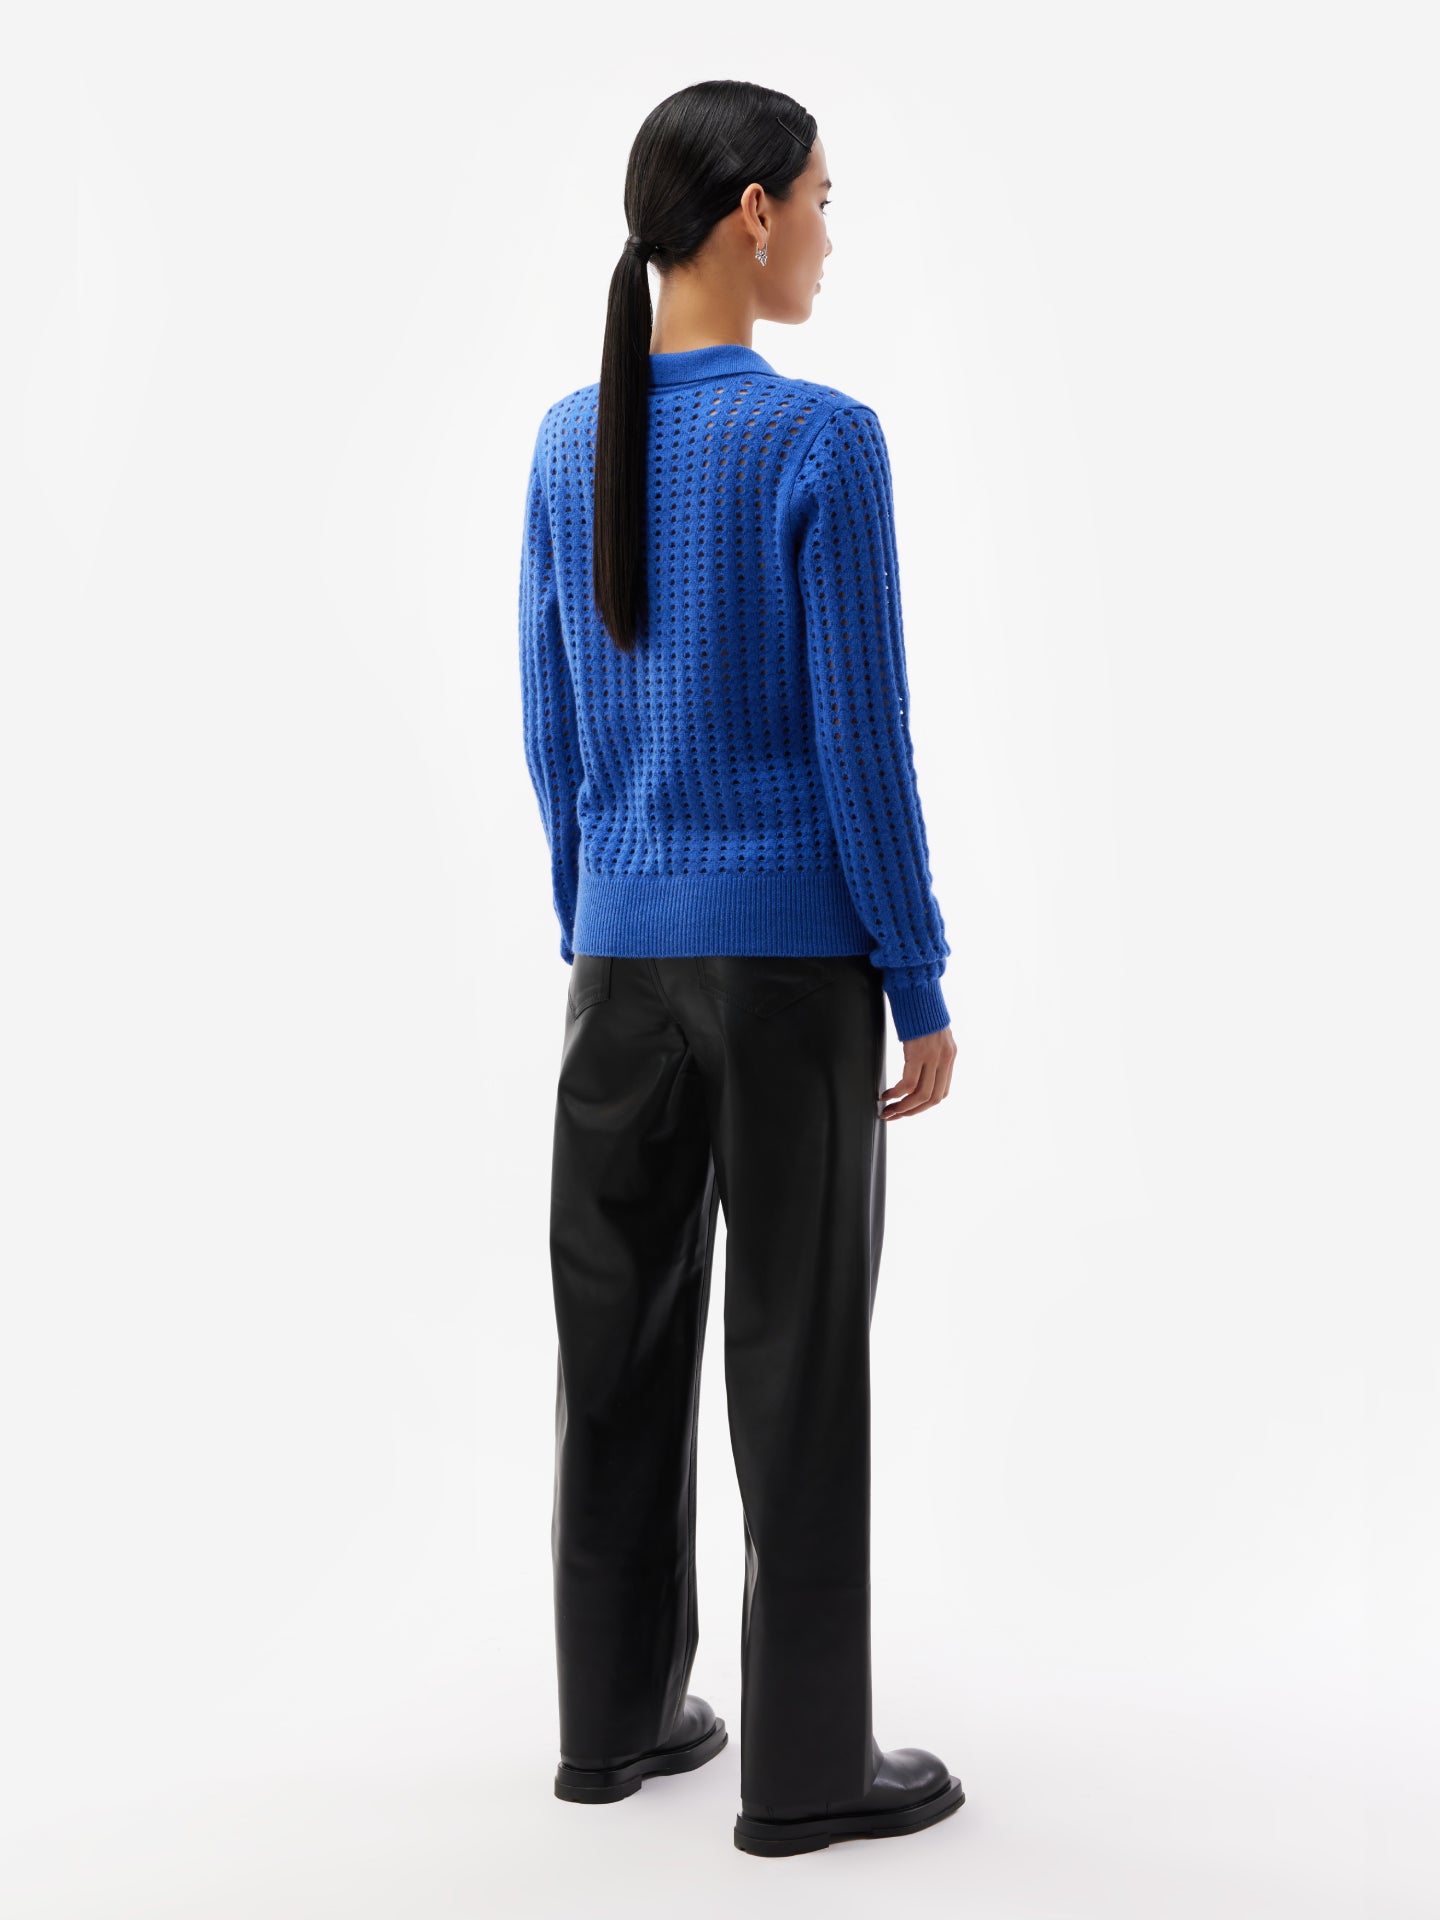 Women's Cashmere Intarsia Knitted Sweater Navy - Gobi Cashmere, S-M / Strong Blue / UK39-1323/546/1743/755/1437/1534